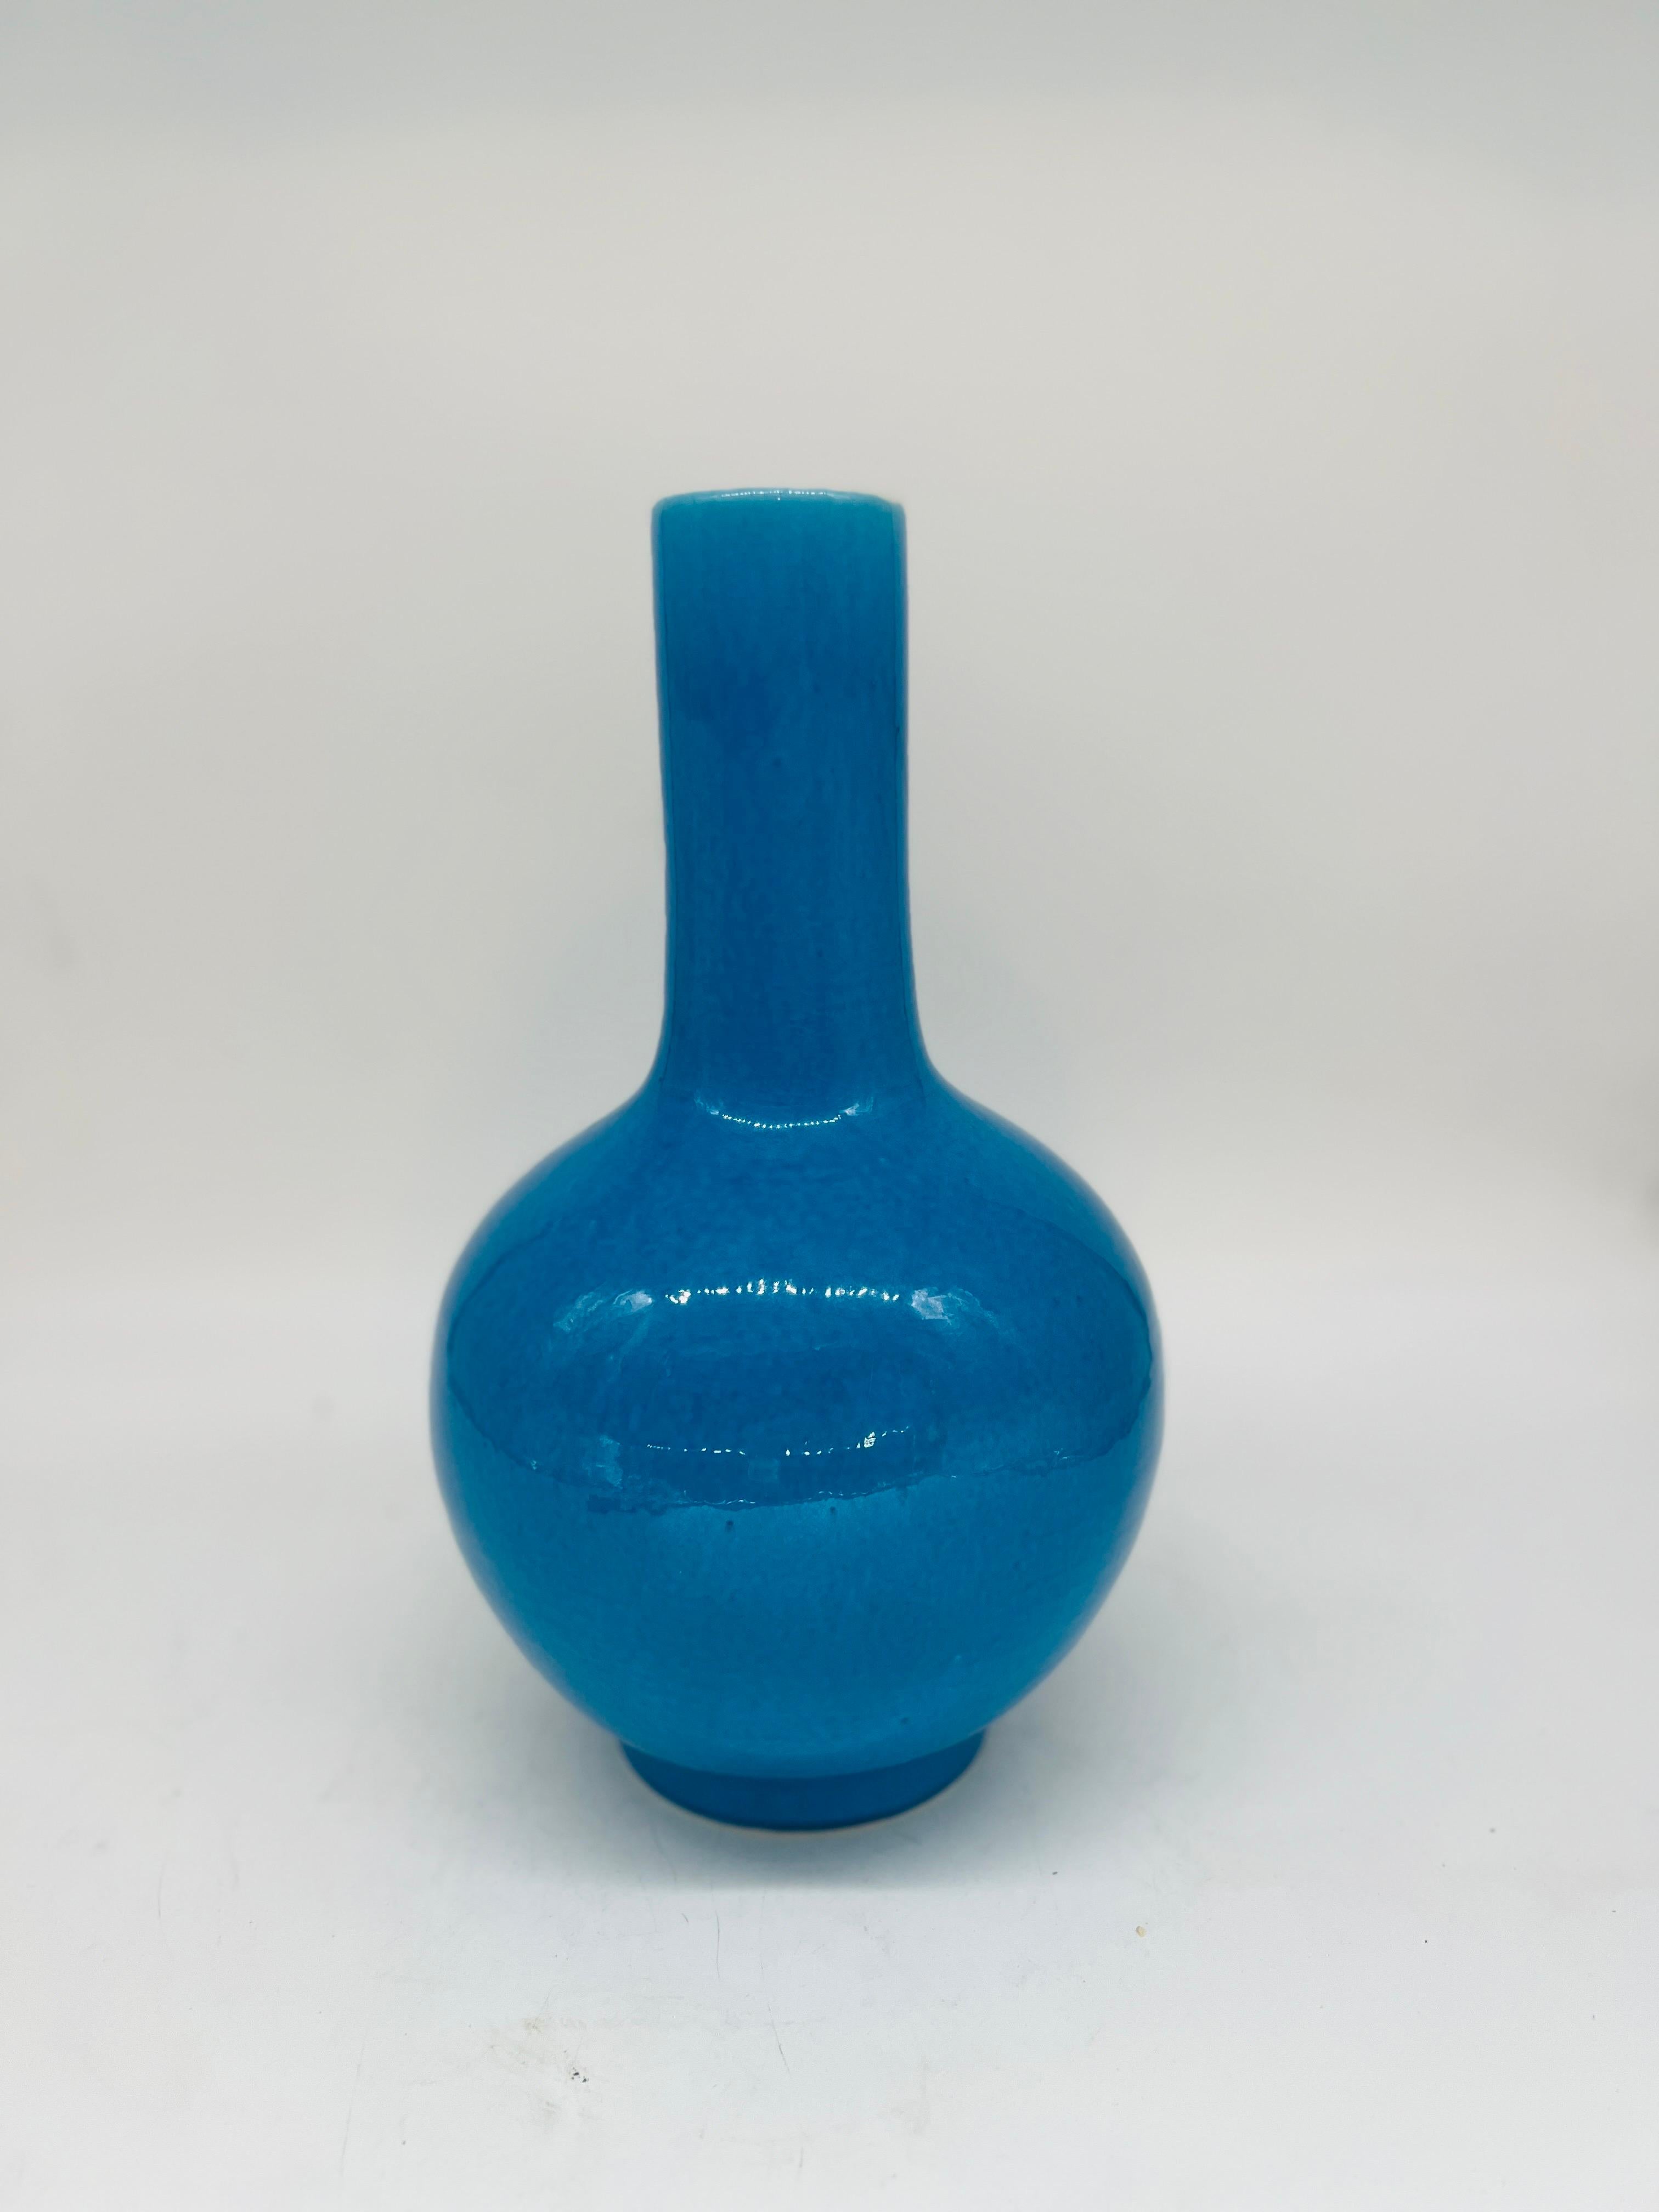 Chinese, 20th century.

A beautiful Chinese peacock blue colored bottle vase. The underside with 6 character mark.